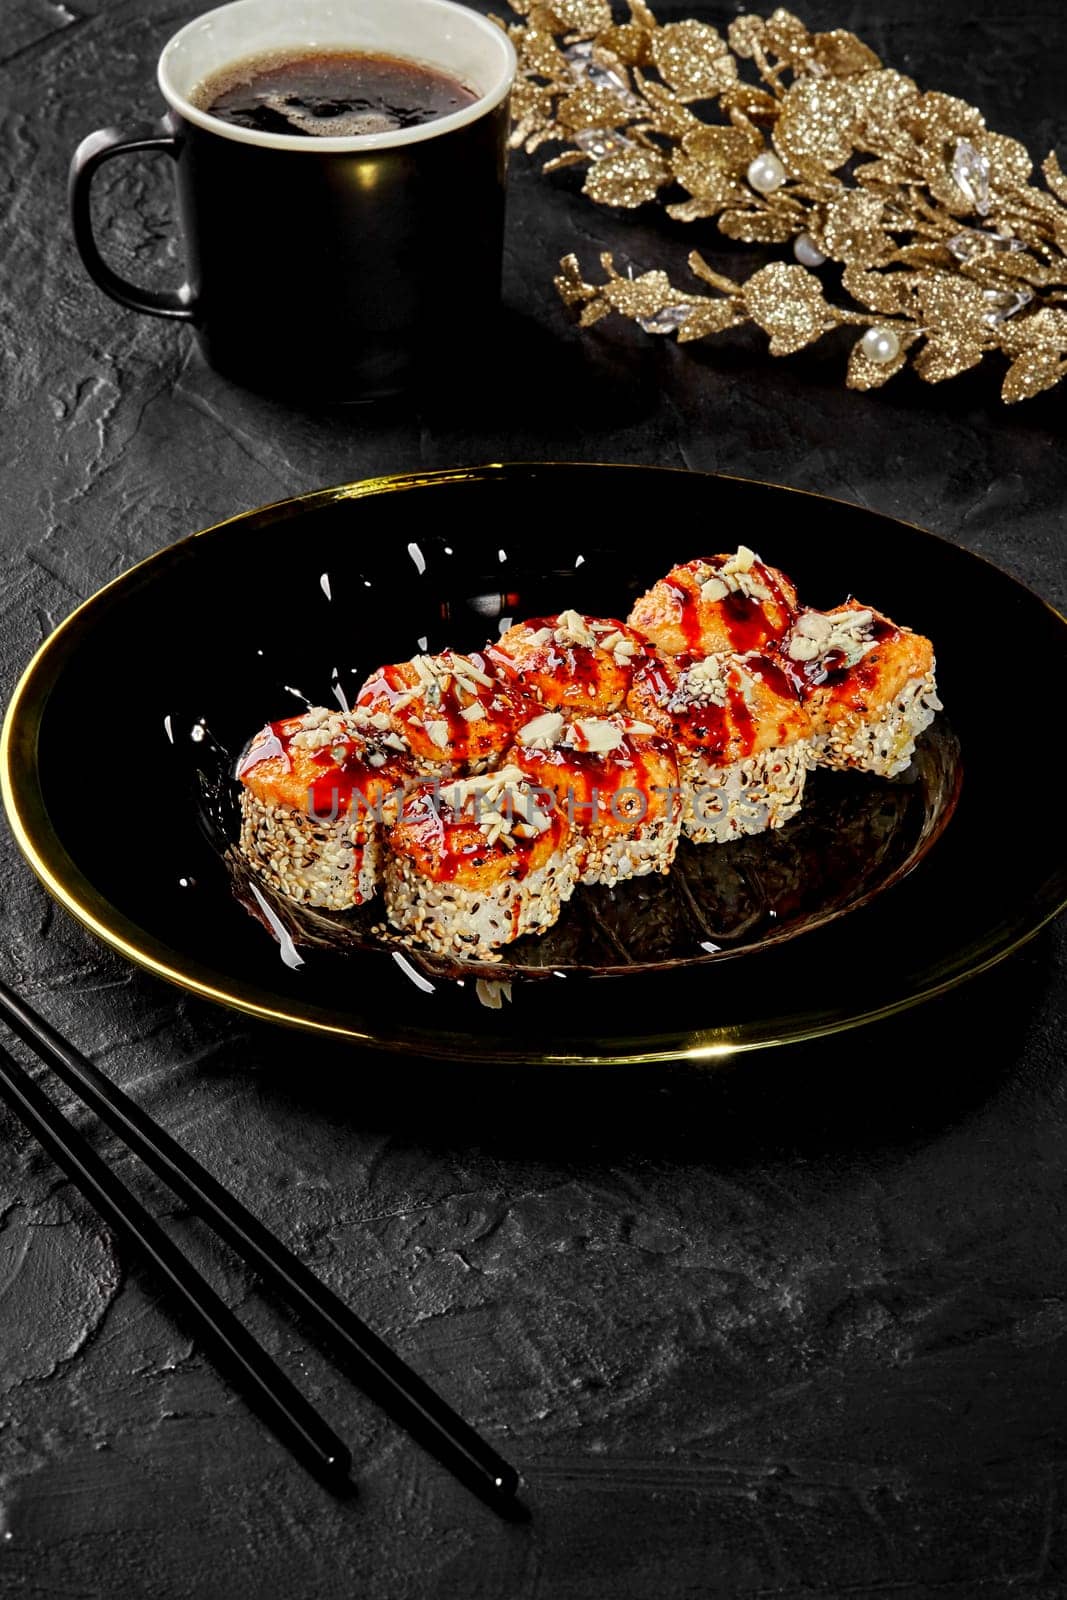 Baked sushi rolls in sesame drizzled with unagi sauce garnished with Parmesan crumbs served on black platter against dark stone surface, adorned with golden decor